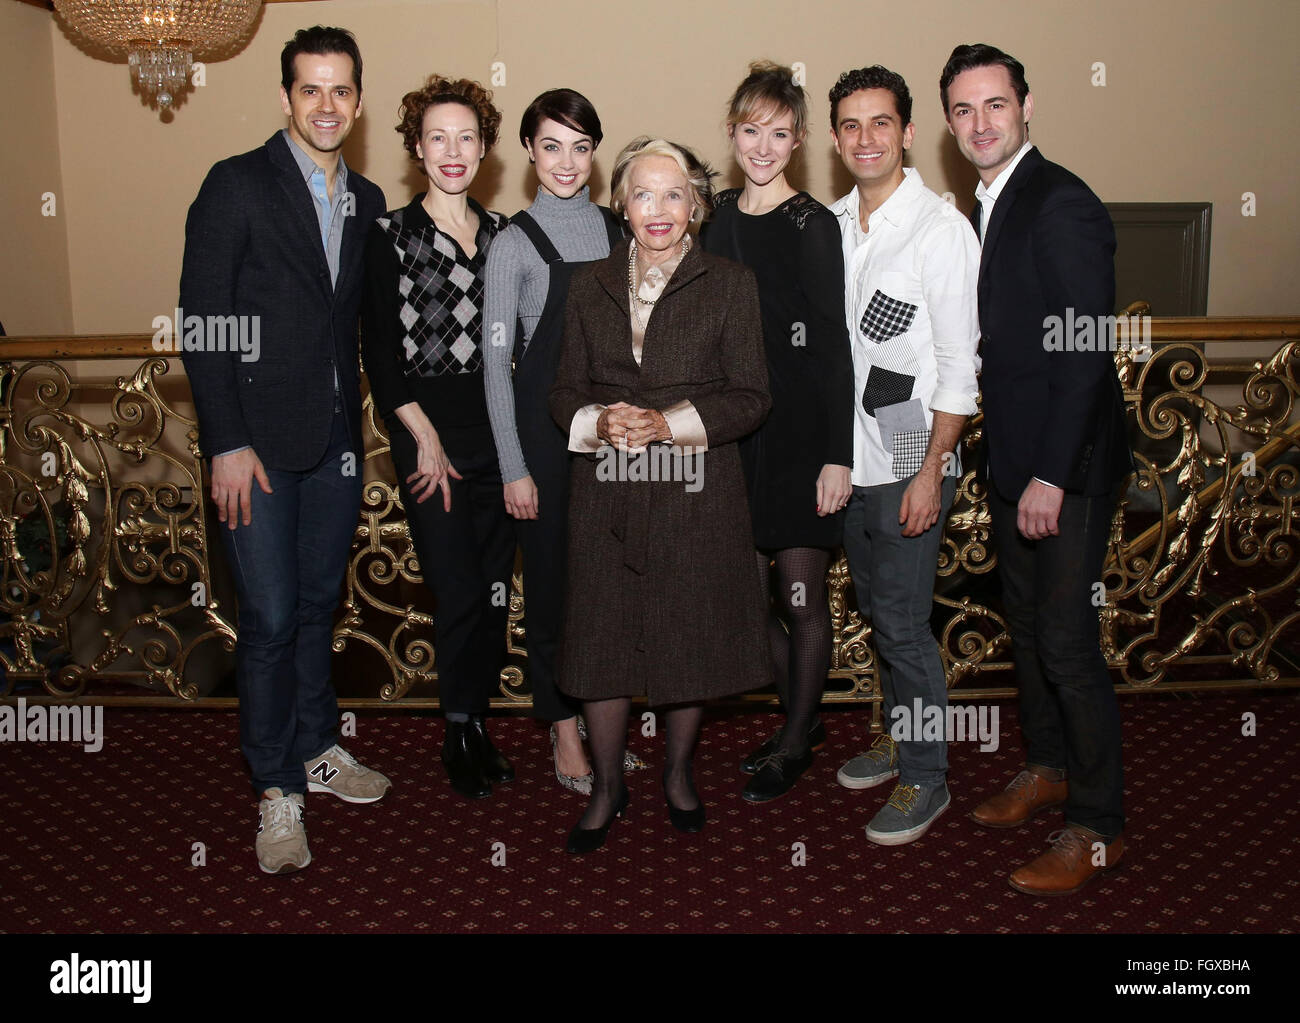 Media day with legendary musical film star Leslie Caron and the Broadway cast of An American in Paris at the Palace Theatre.  Featuring: Robert Fairchild, Veanne Cox, Leanne Cope, Leslie Caron, Jill Paice, Brandon Uranowitz, Max von Essen Where: New York, New York, United States When: 18 Jan 2016 Stock Photo